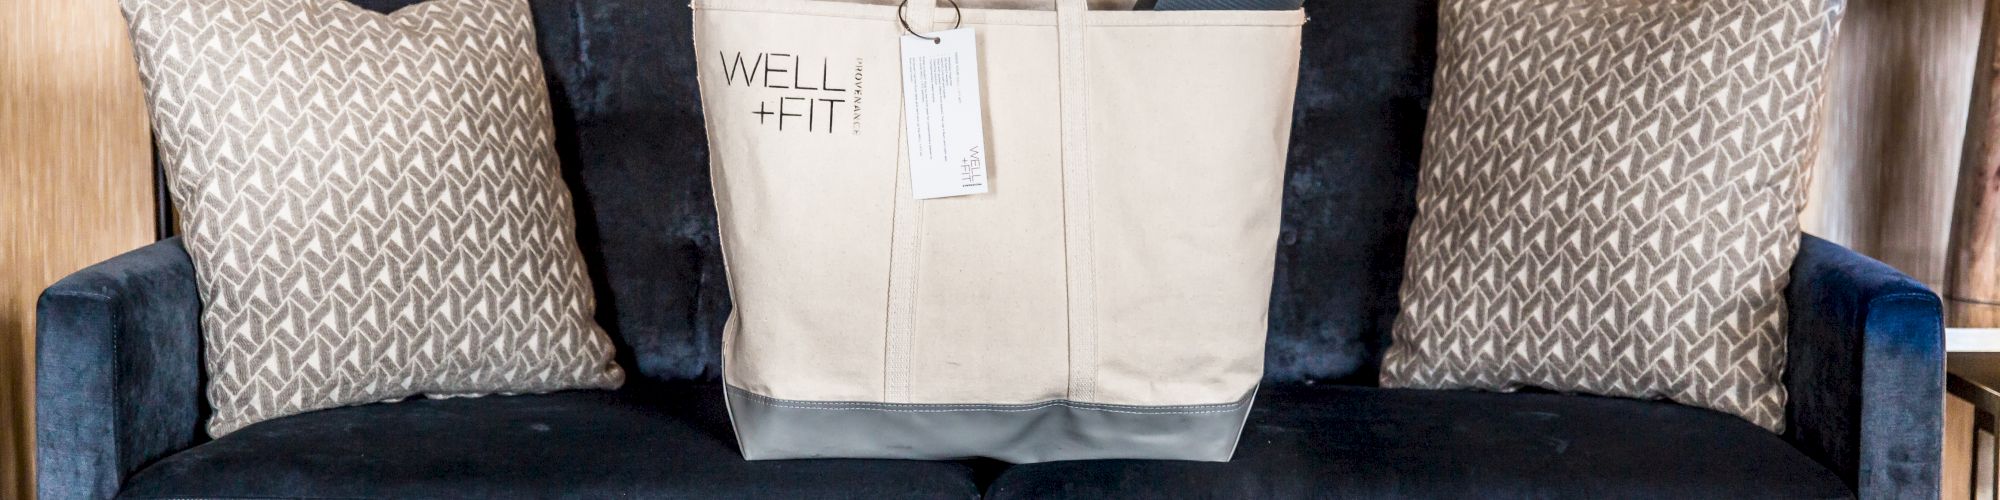 A beige tote bag labeled 